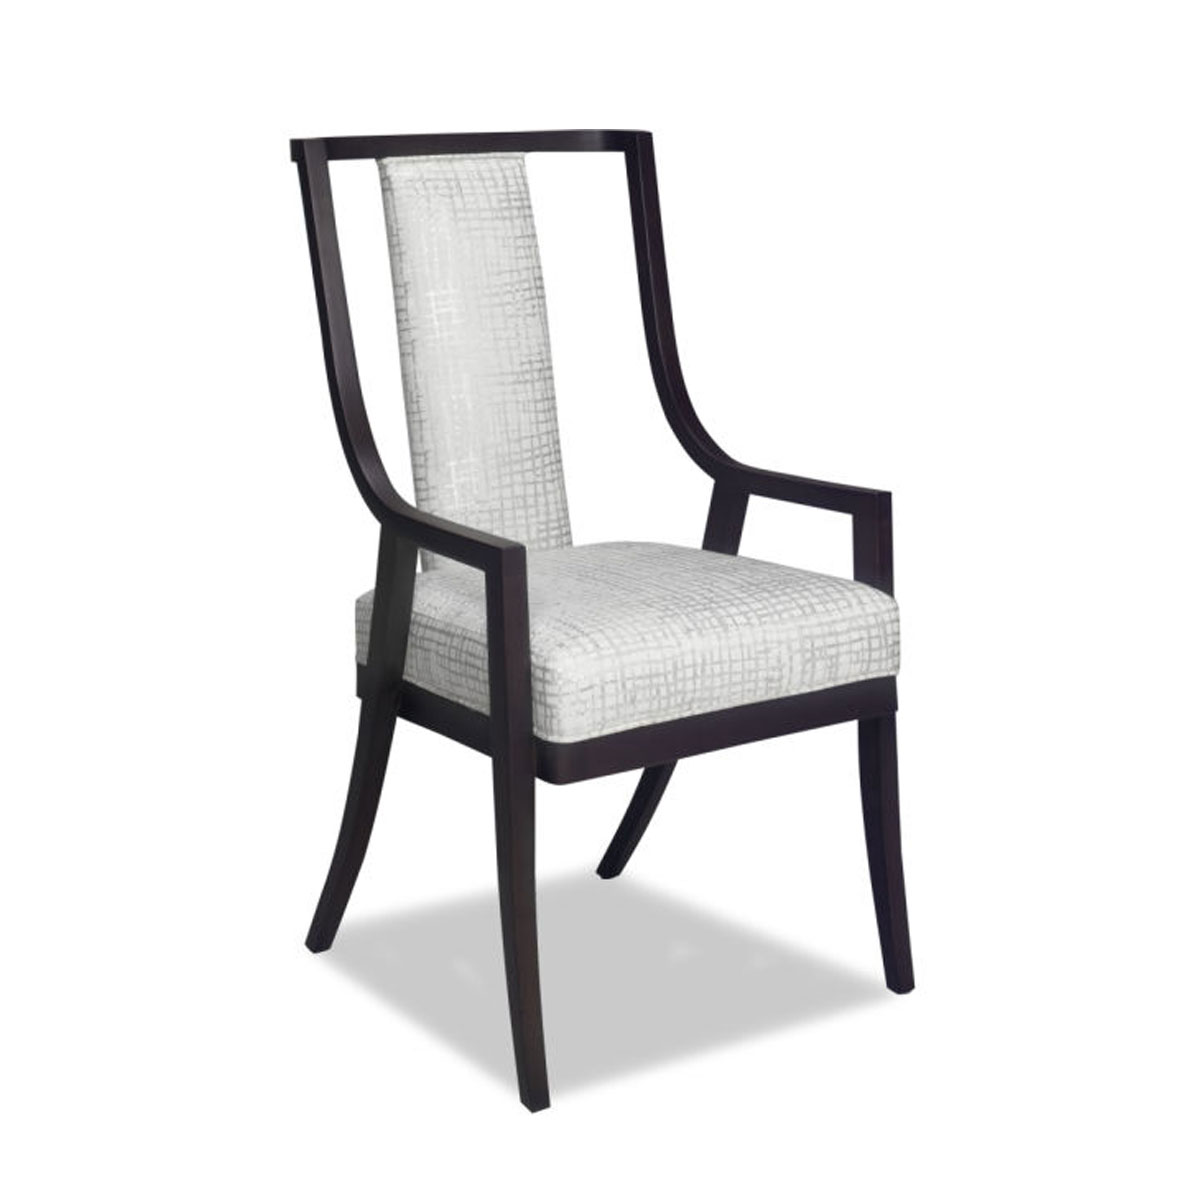 Parker Southern 8828 Caleb Chair 